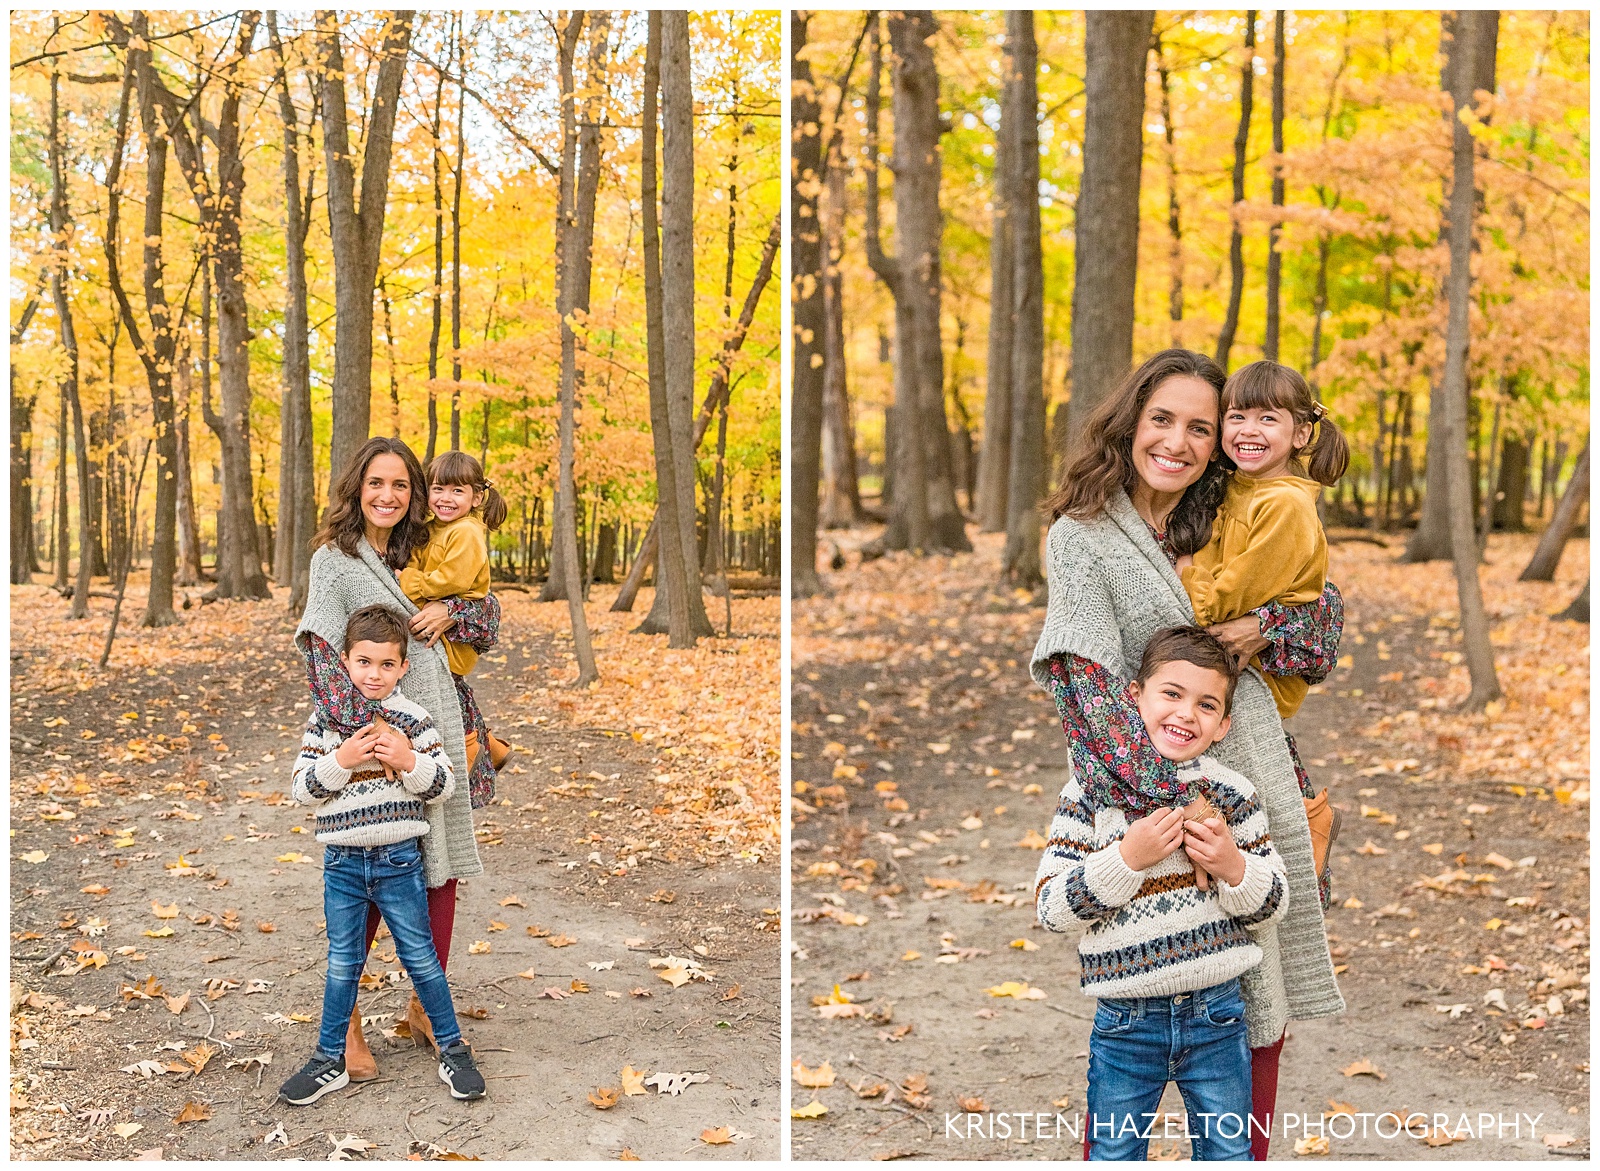 Fall portrait of a Mother and her young daughter and son